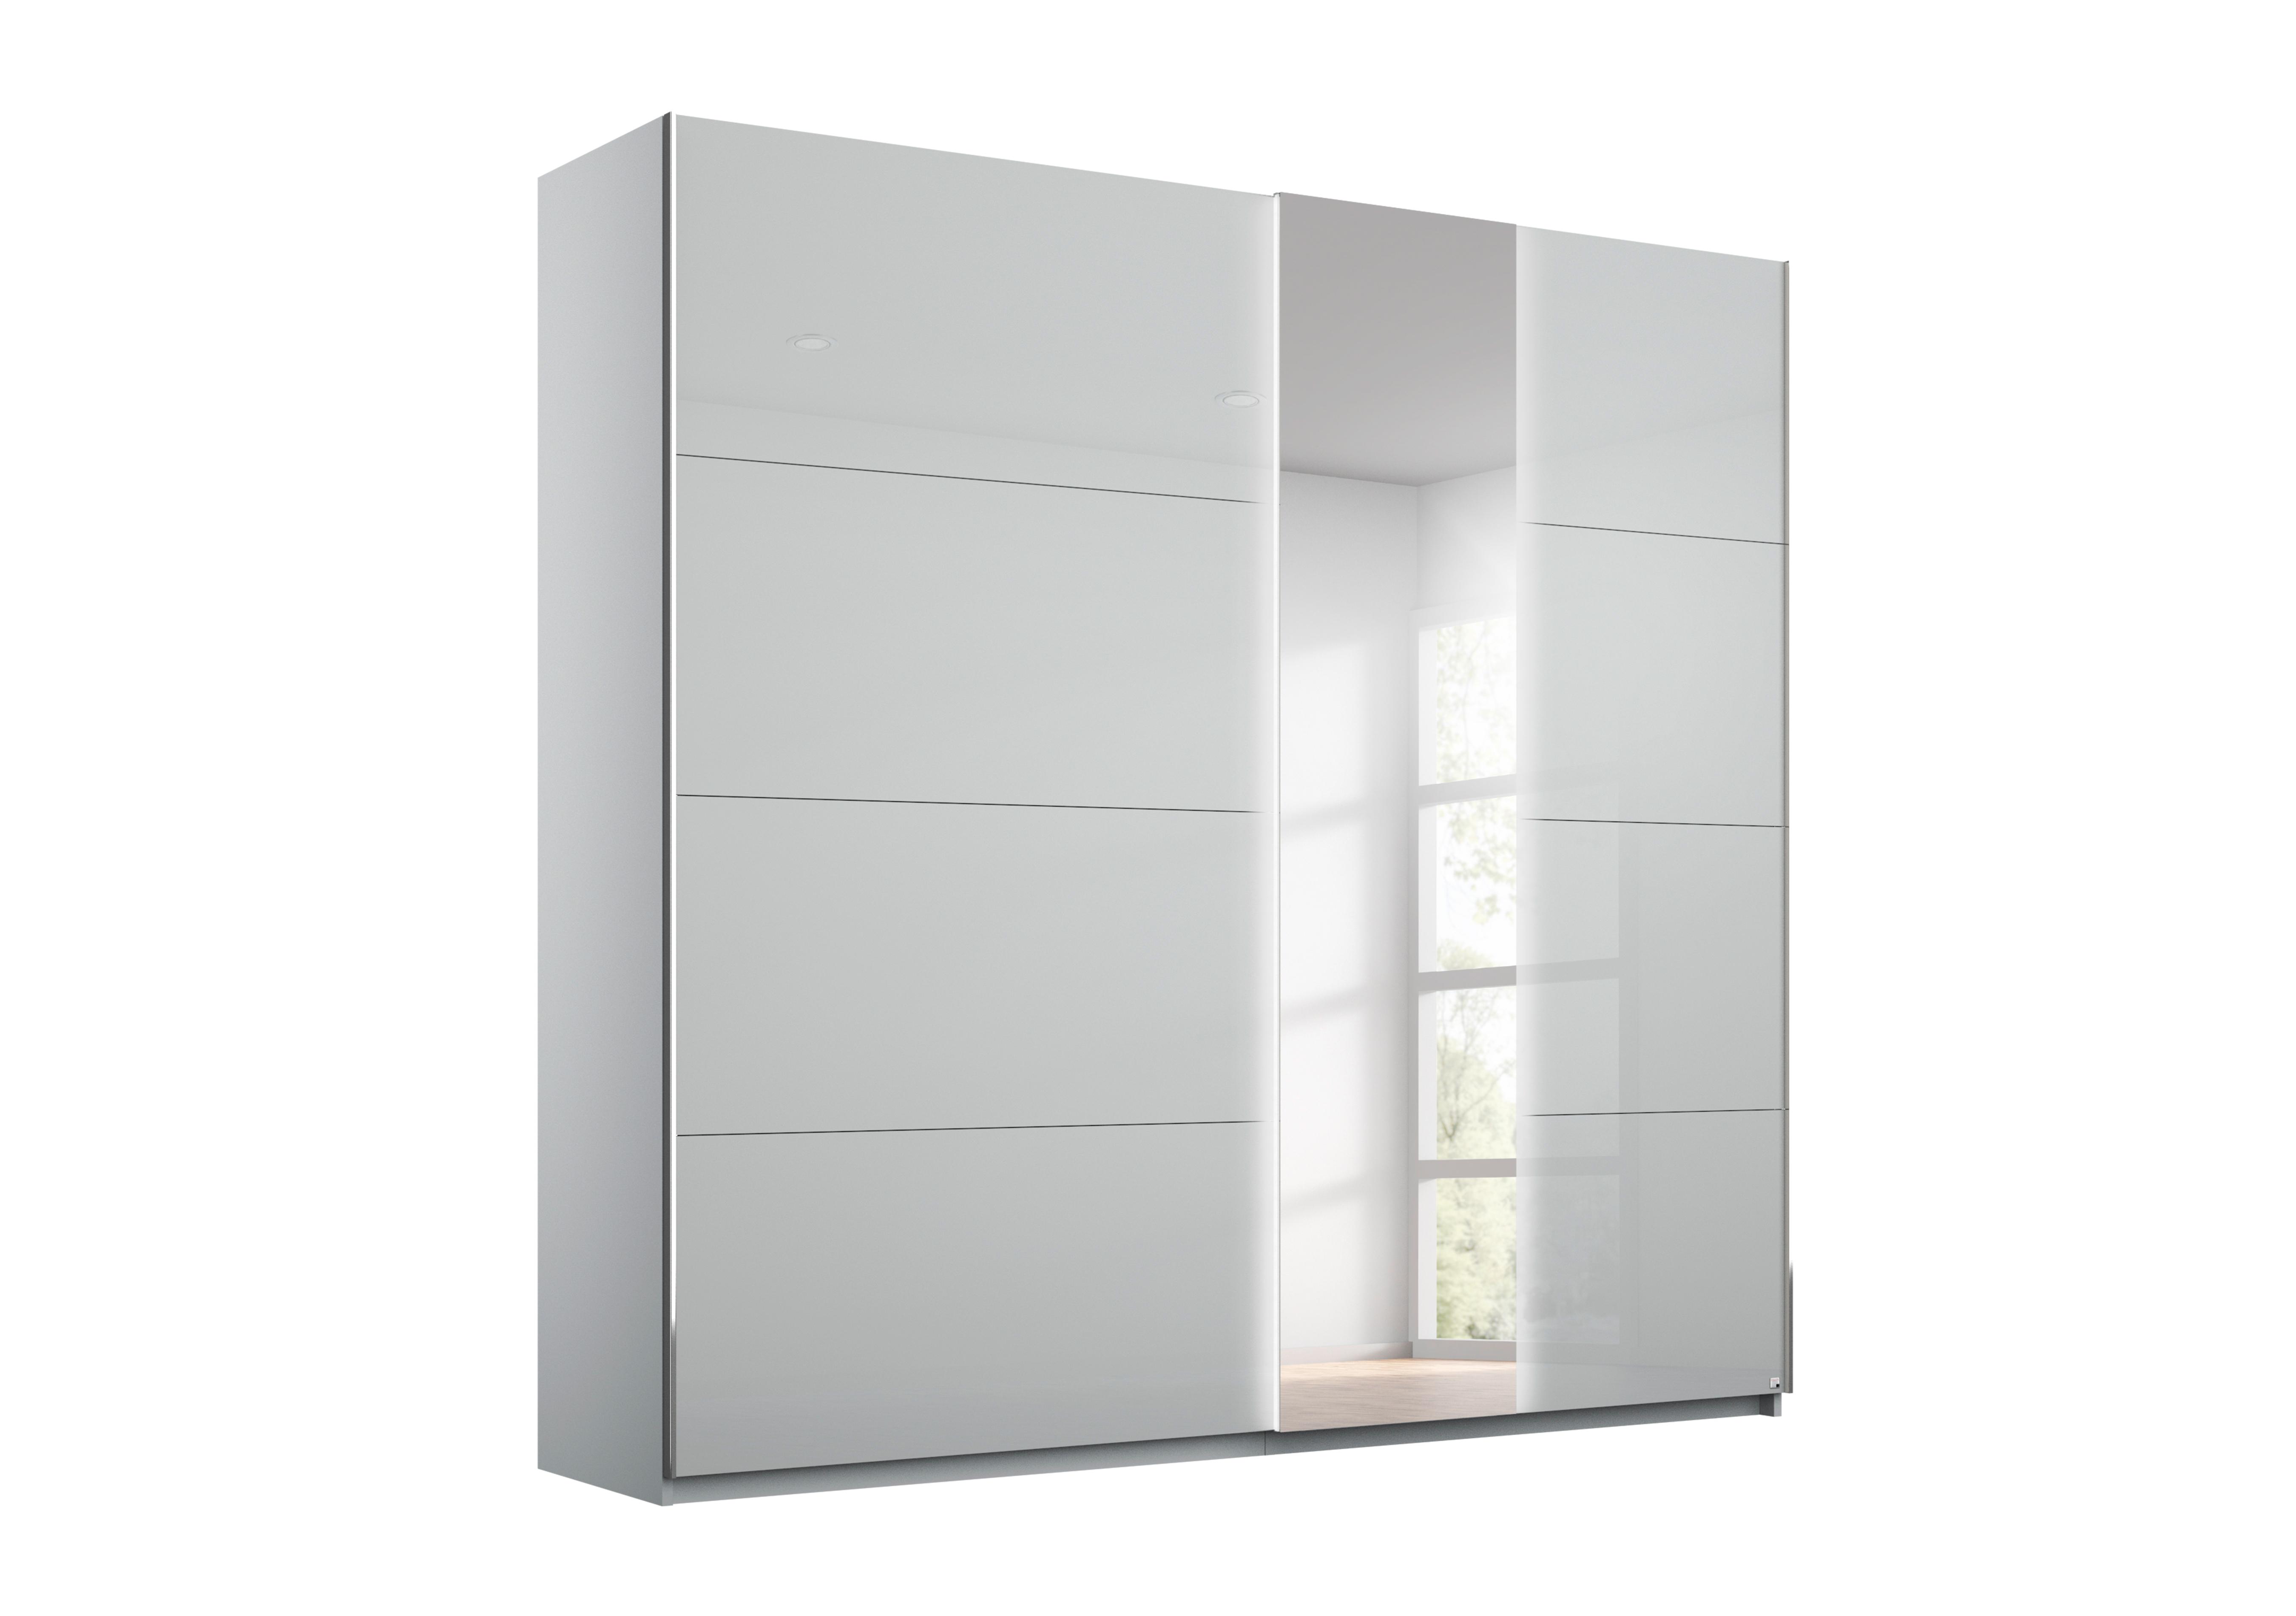 Perth Sliding 200cm Wardrobe with Lights in Z2603 Silk Grey Carc And Glass on Furniture Village